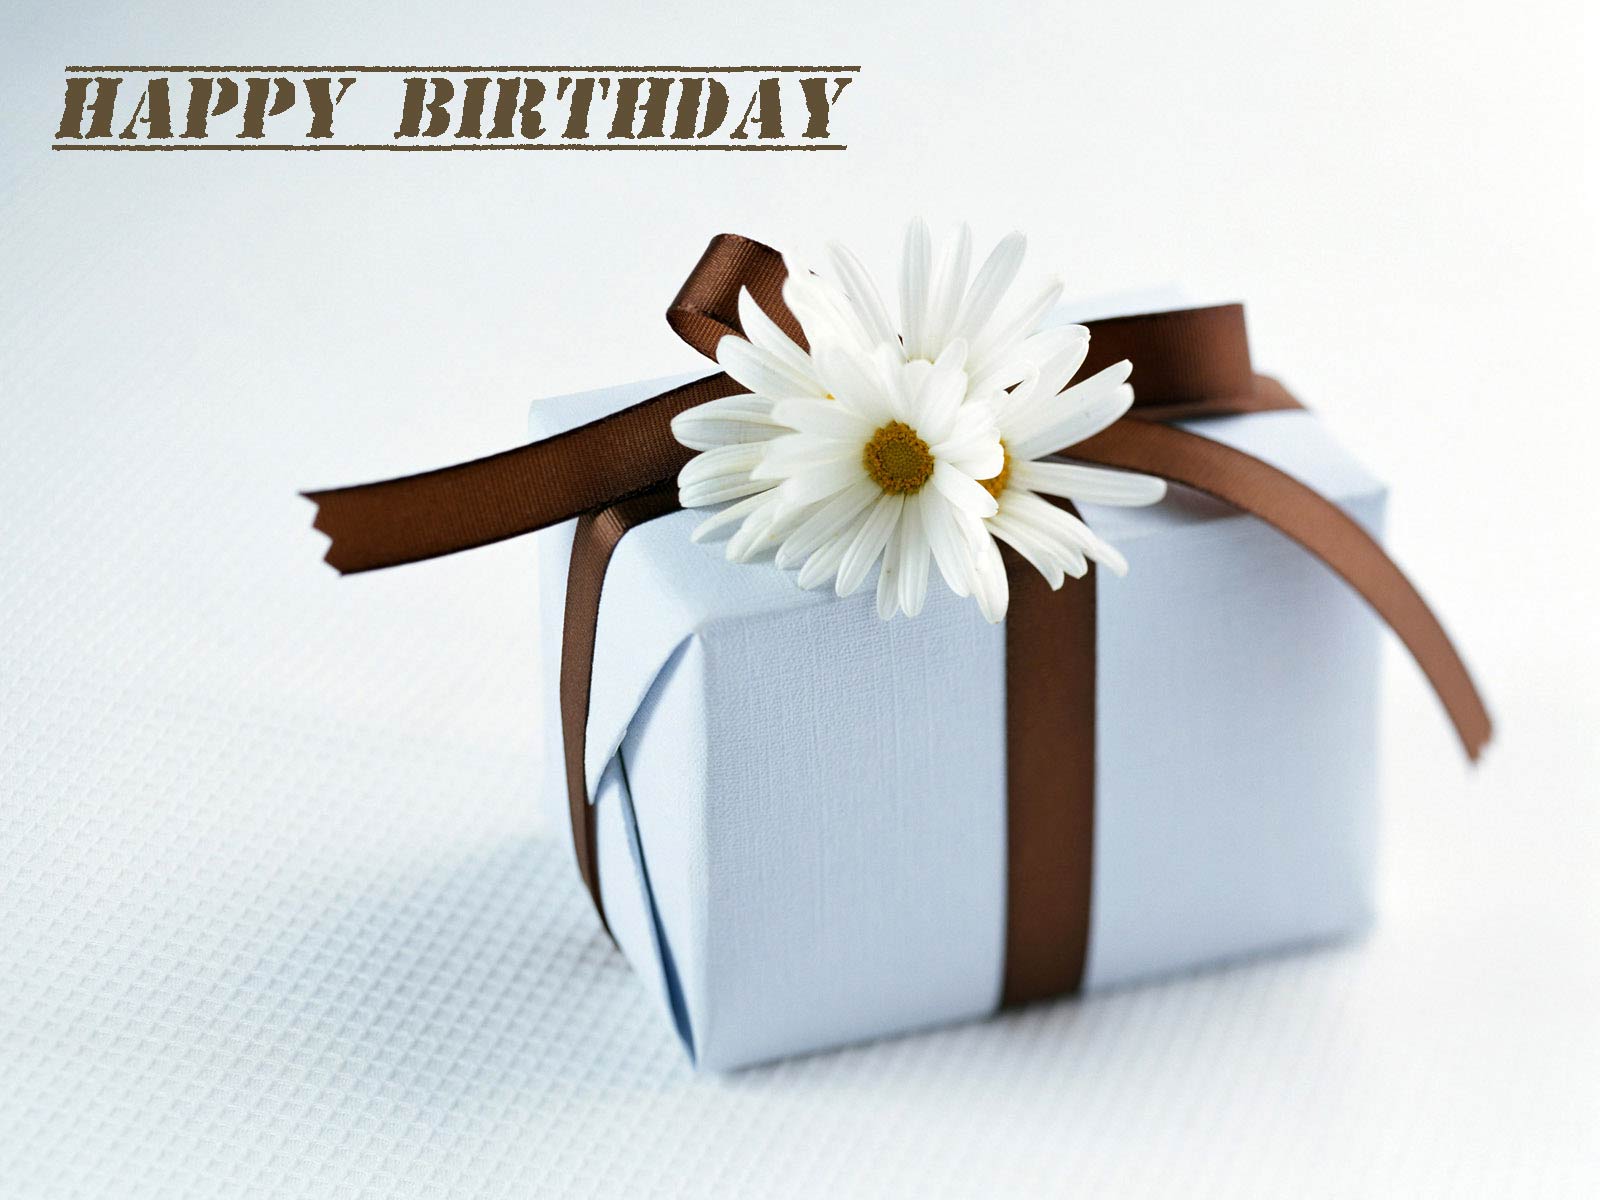 Lovely and Interesting Birthday Wishes That Can Make Your Sister-in-law Smile 2